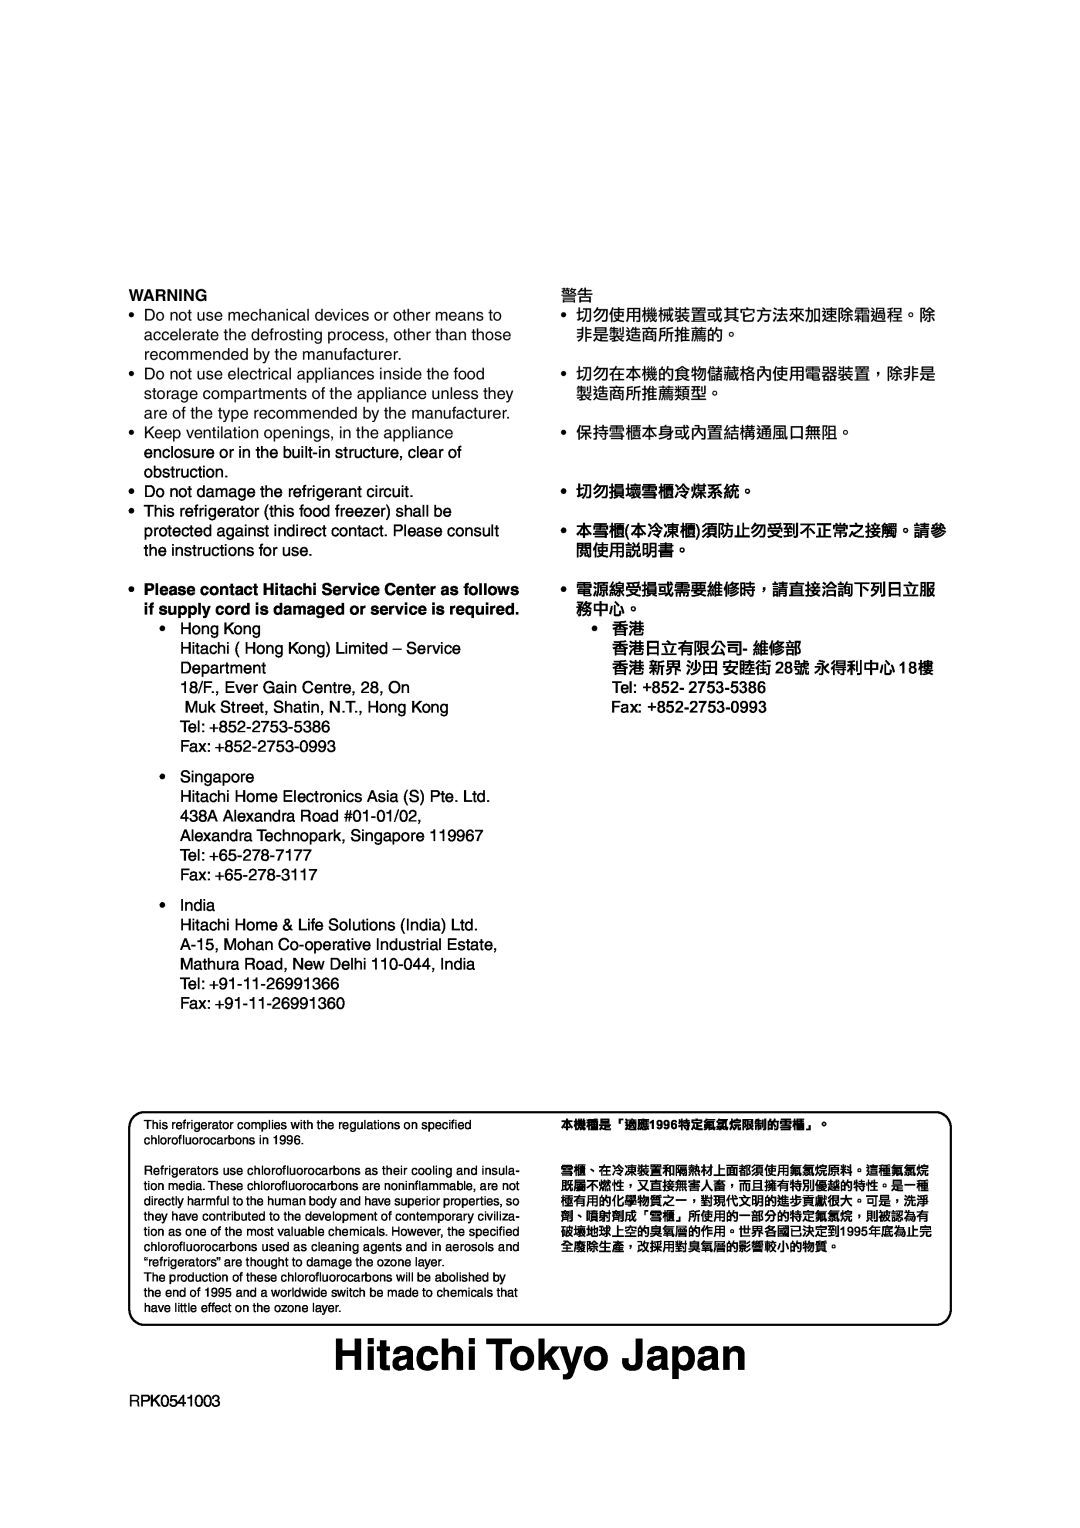 Hitachi R-S37SVH, R-S37SVND, R-S37SVS operation manual Hitachi Tokyo Japan, if supply cord is damaged or service is required 